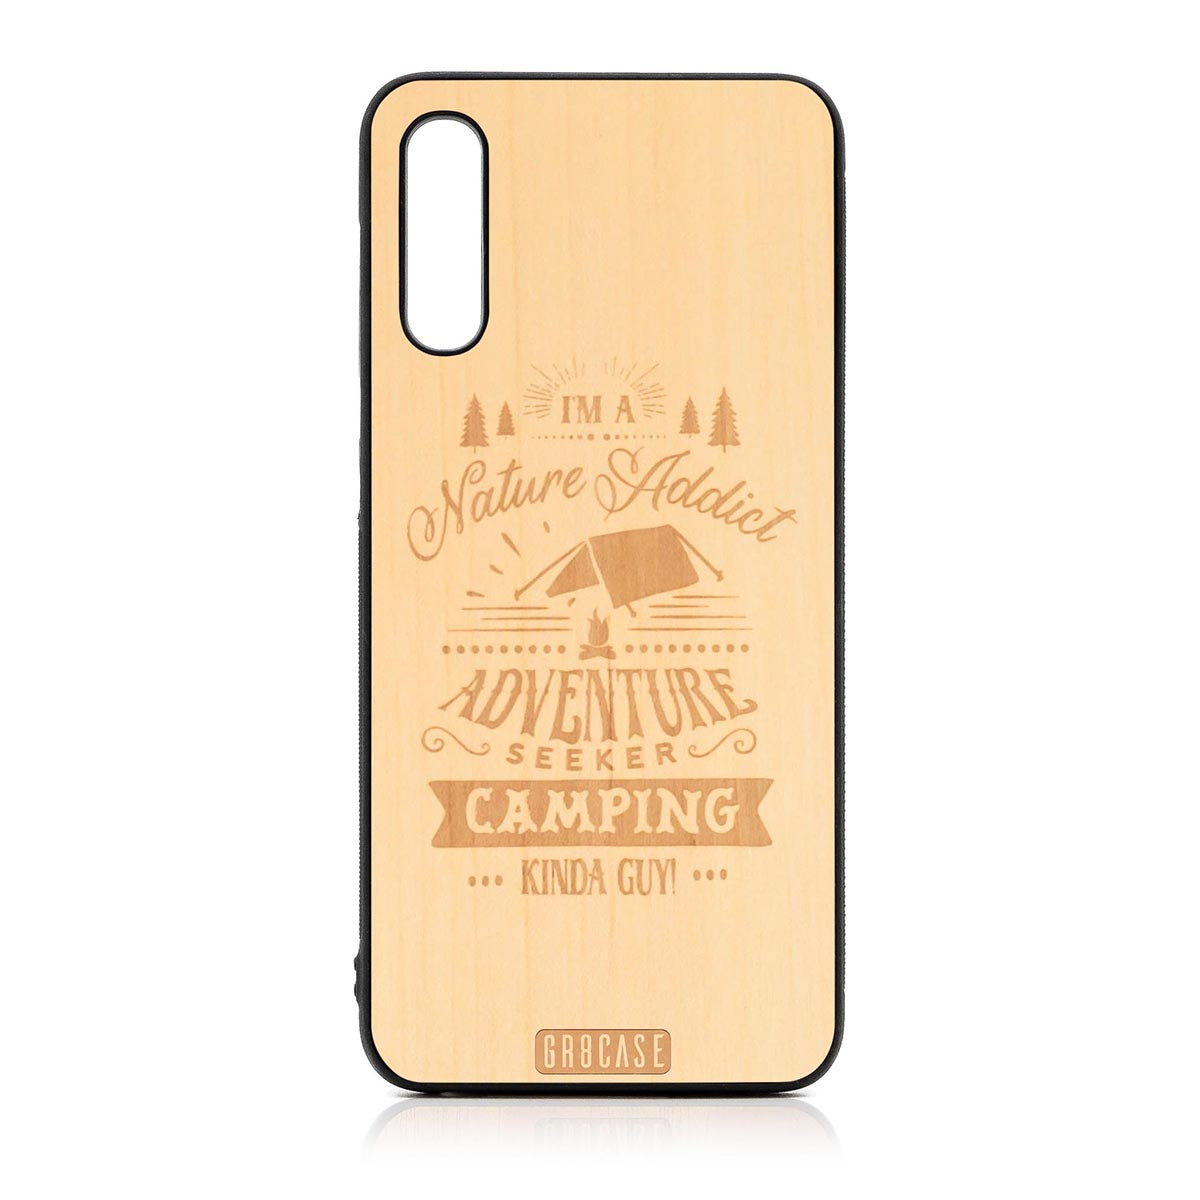 I'm A Nature Addict Adventure Seeker Camping Kinda Guy Design Wood Case For Samsung Galaxy A50 by GR8CASE